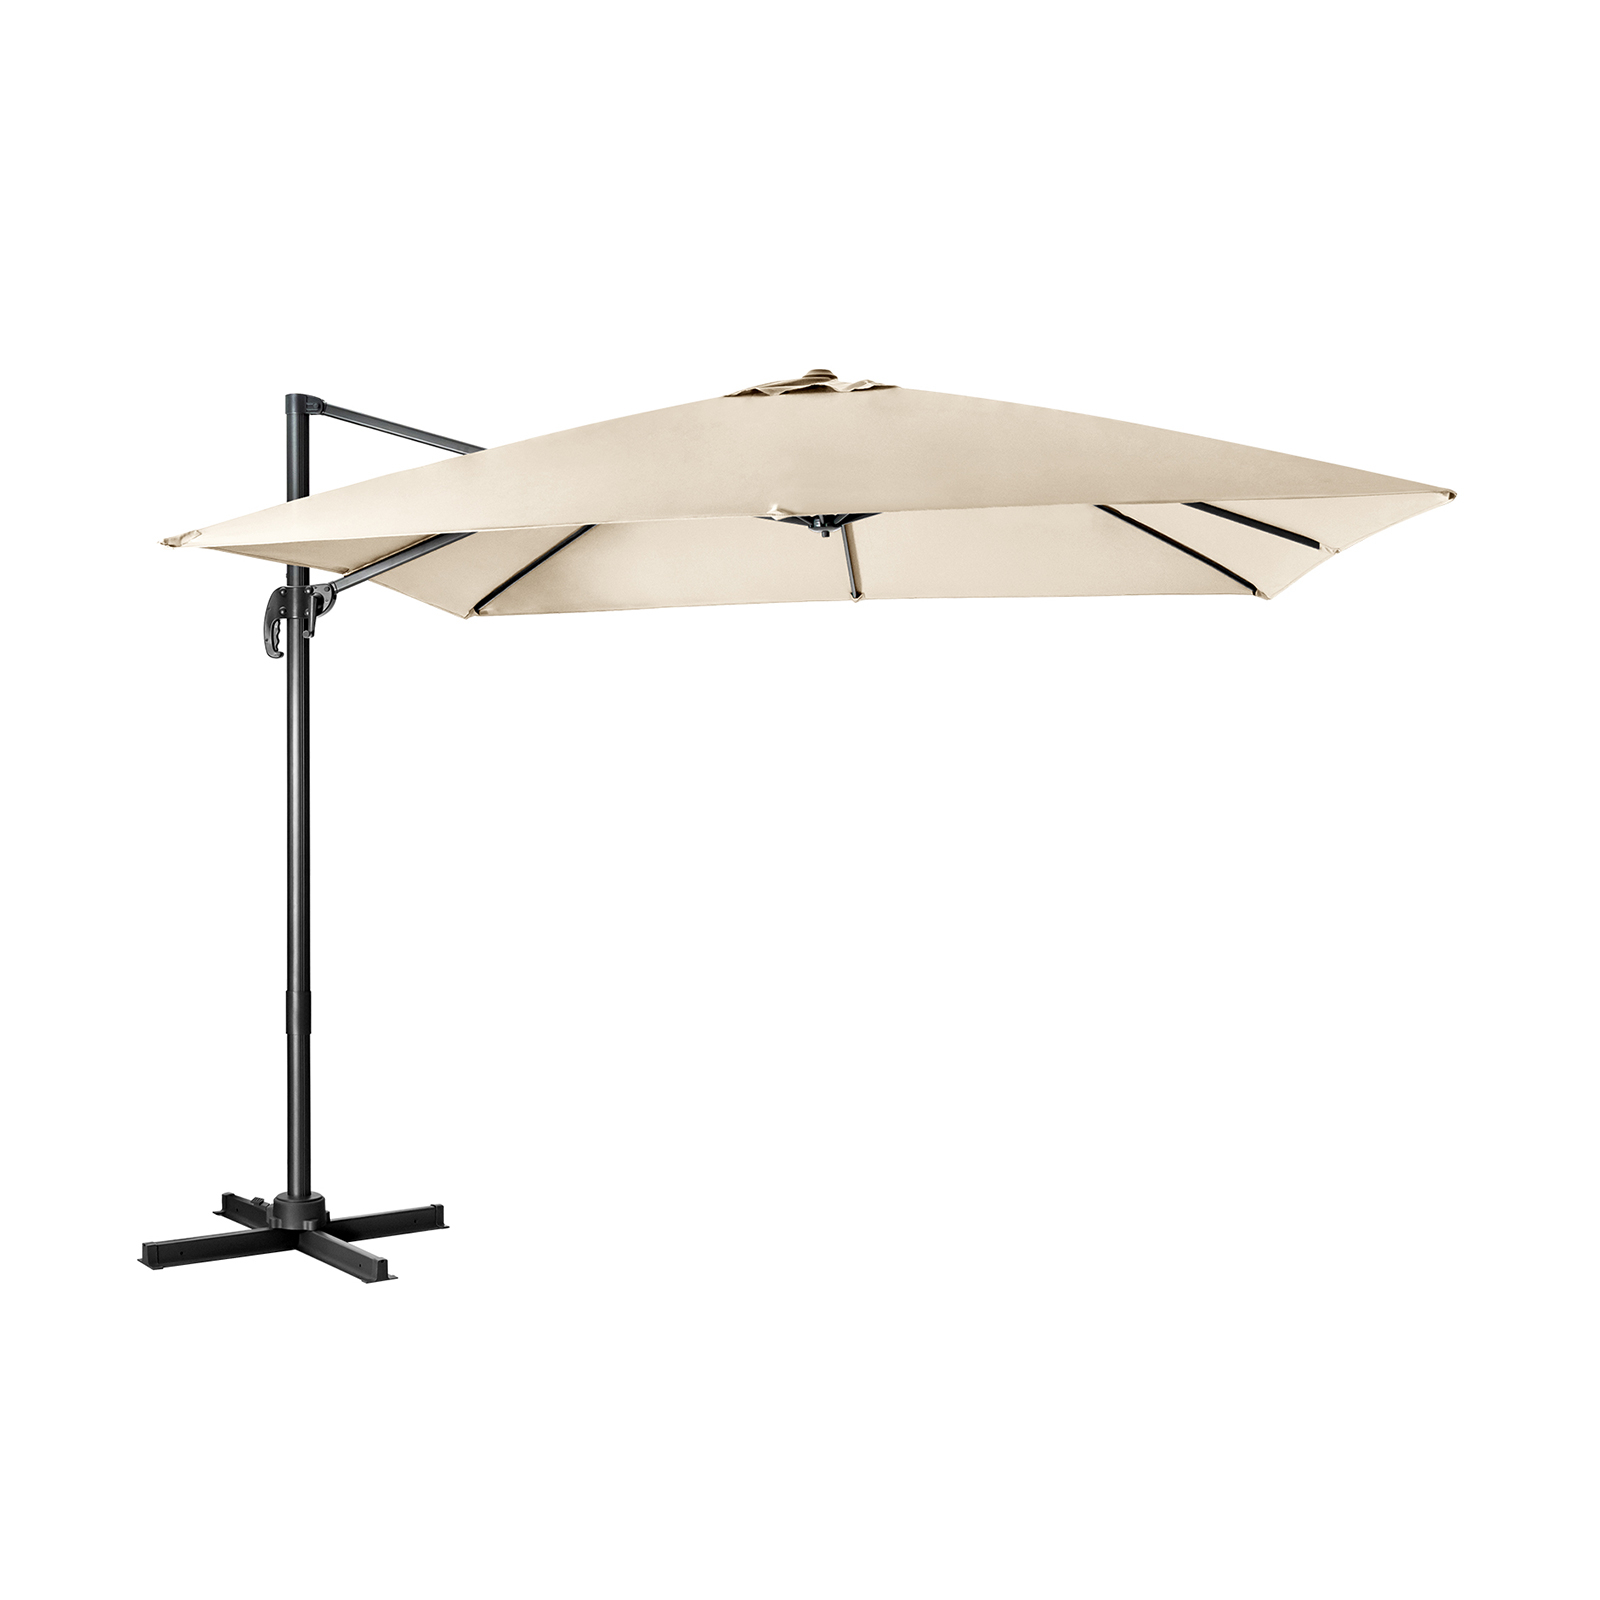 Patio Umbrella Square Offset with Cross Base and Tilt Adjustable-Beige